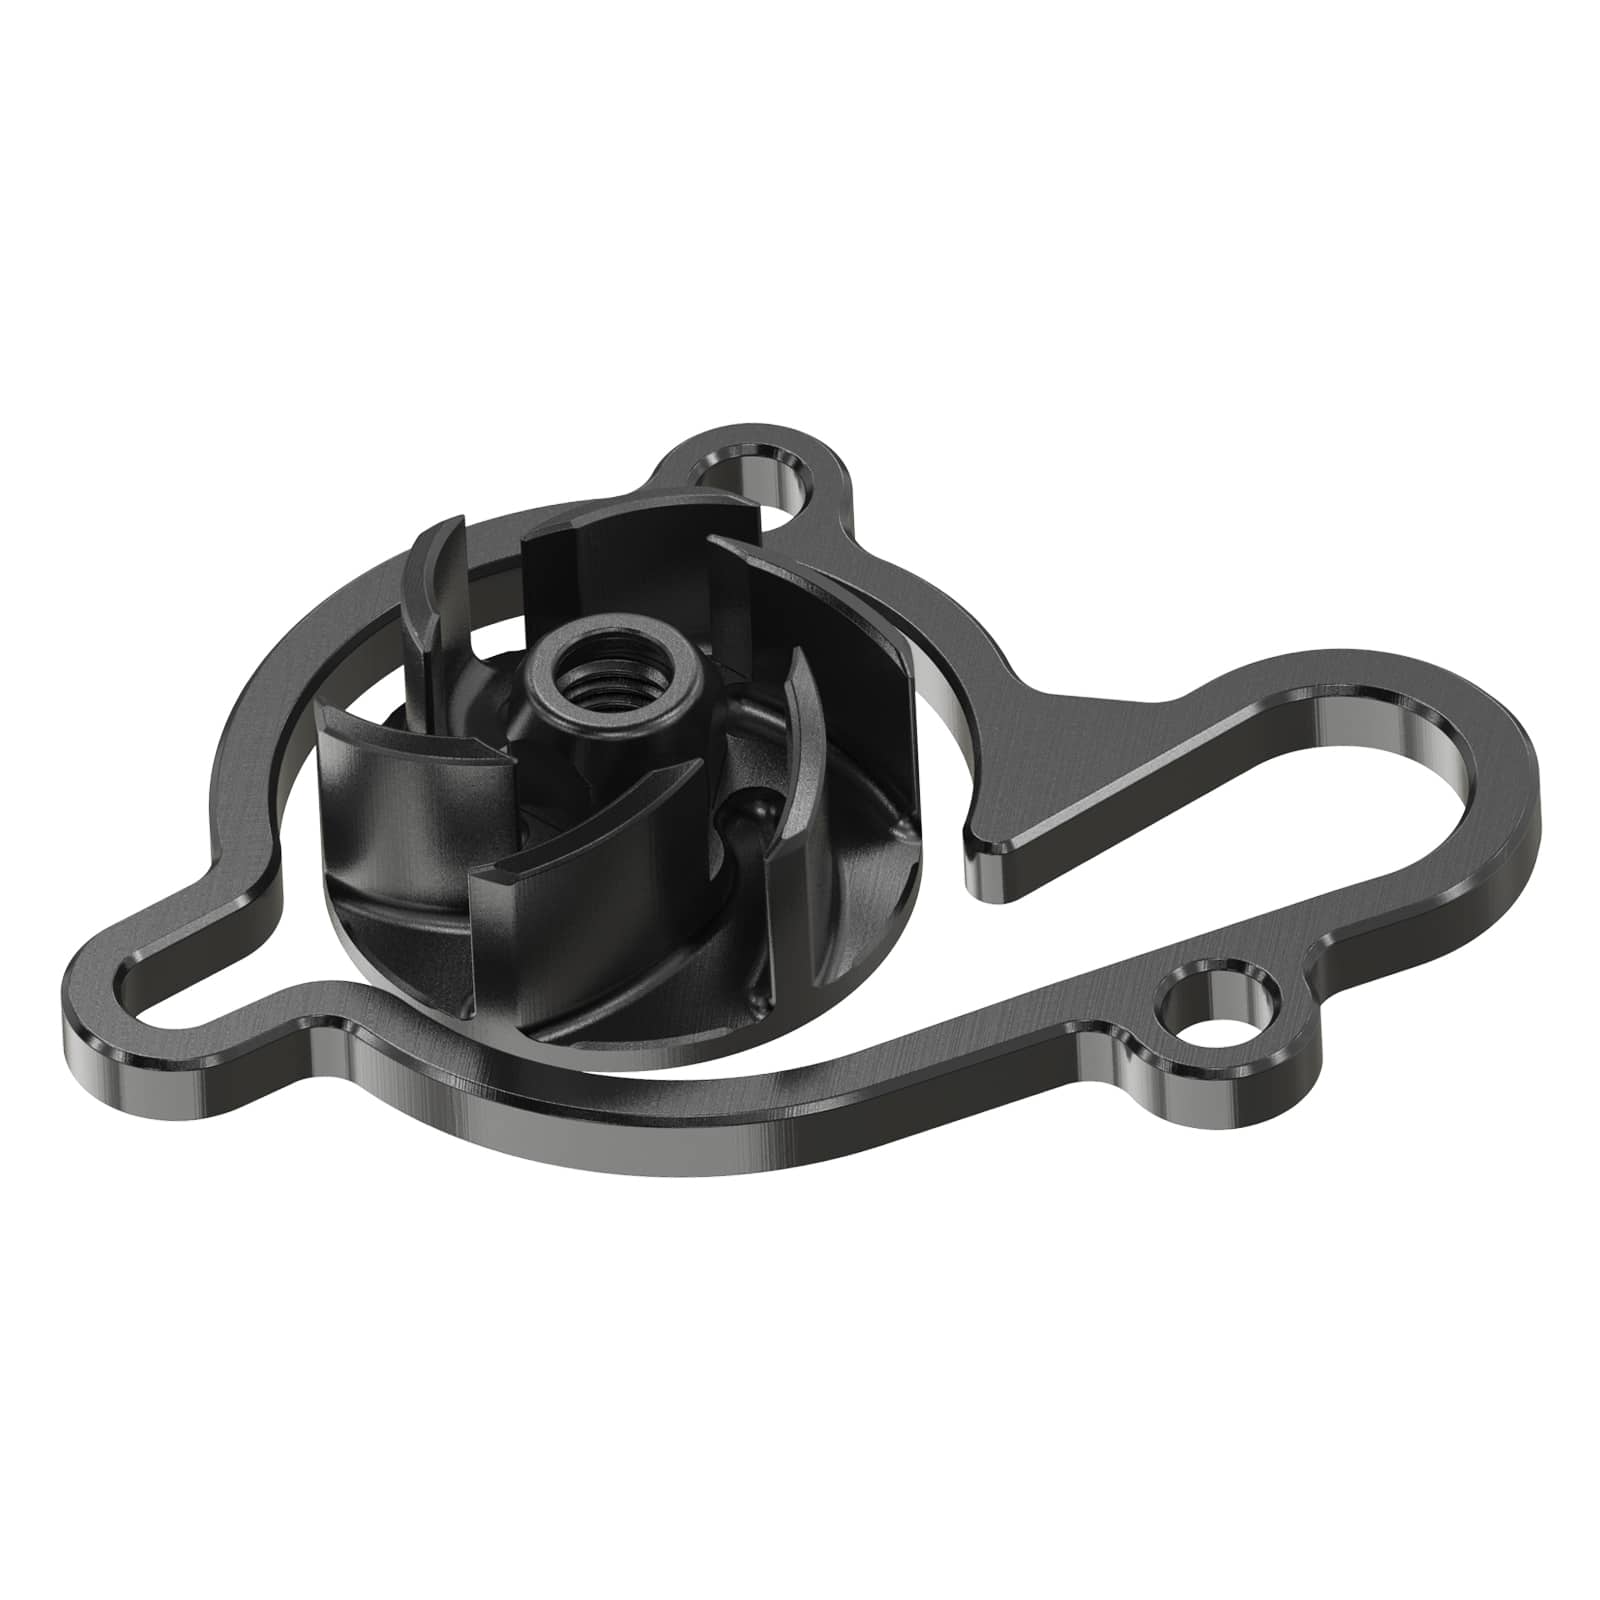 Oversized Water Pump Impeller Cooler For Yamaha YZ85